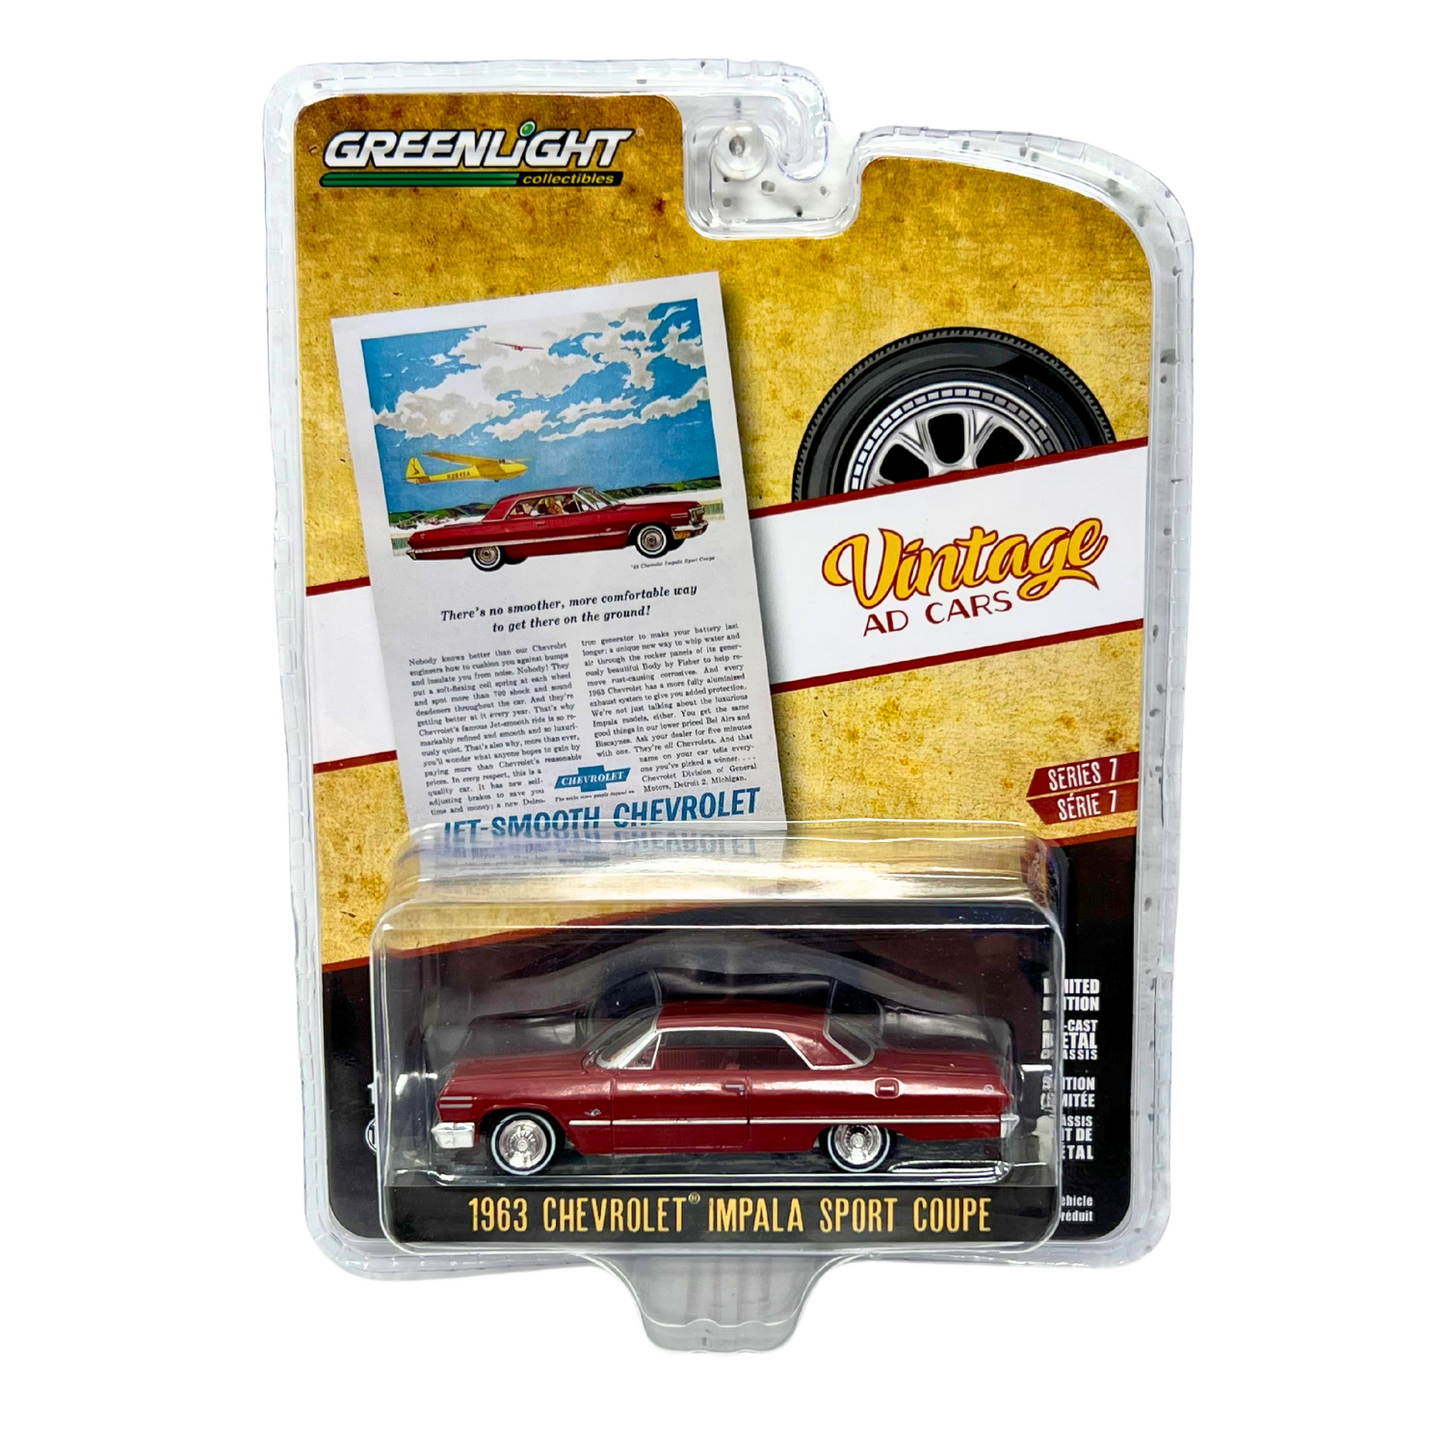 Greenlight Vintage Ad Cars 1983 Chevrolet Impala Sport Coupe 1:64 Diecast